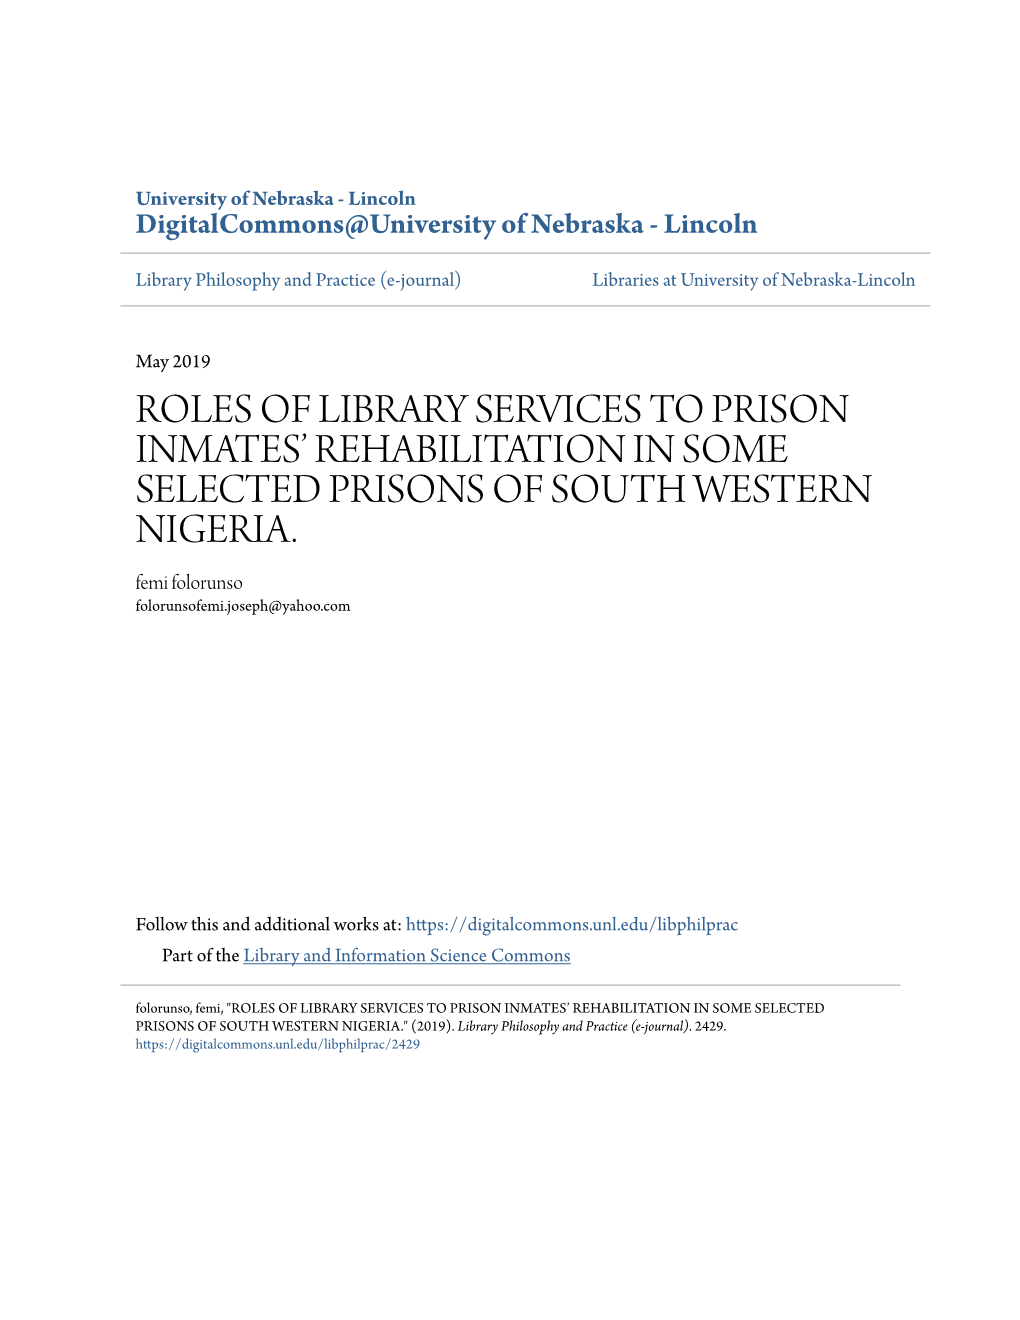 Roles of Library Services to Prison Inmates’ Rehabilitation in Some Selected Prisons of South Western Nigeria